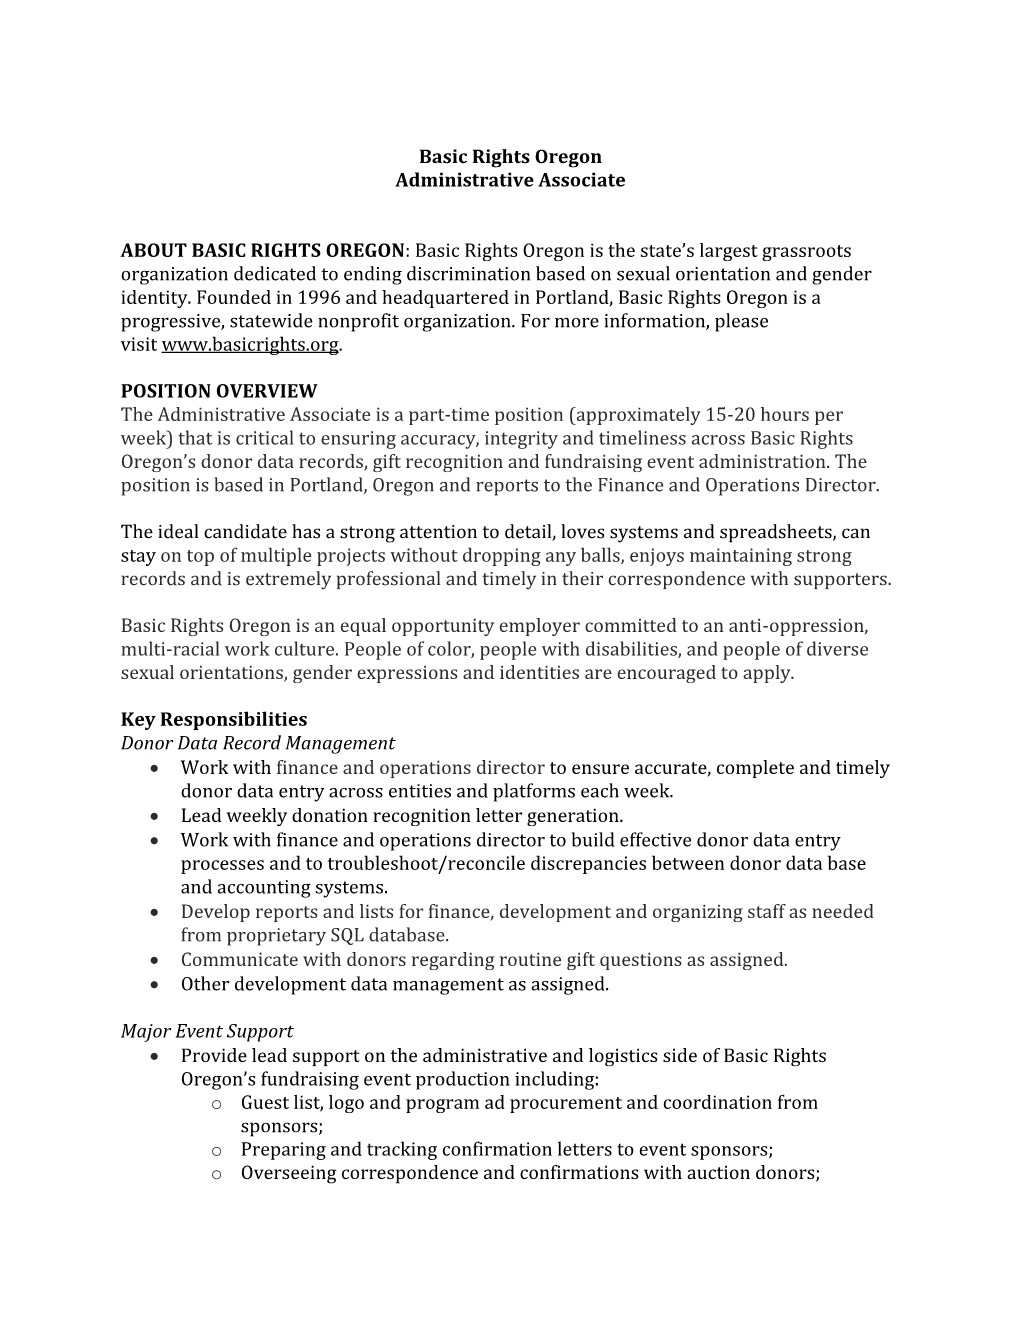 Basic Rights Oregon Administrative Associate ABOUT BASIC RIGHTS